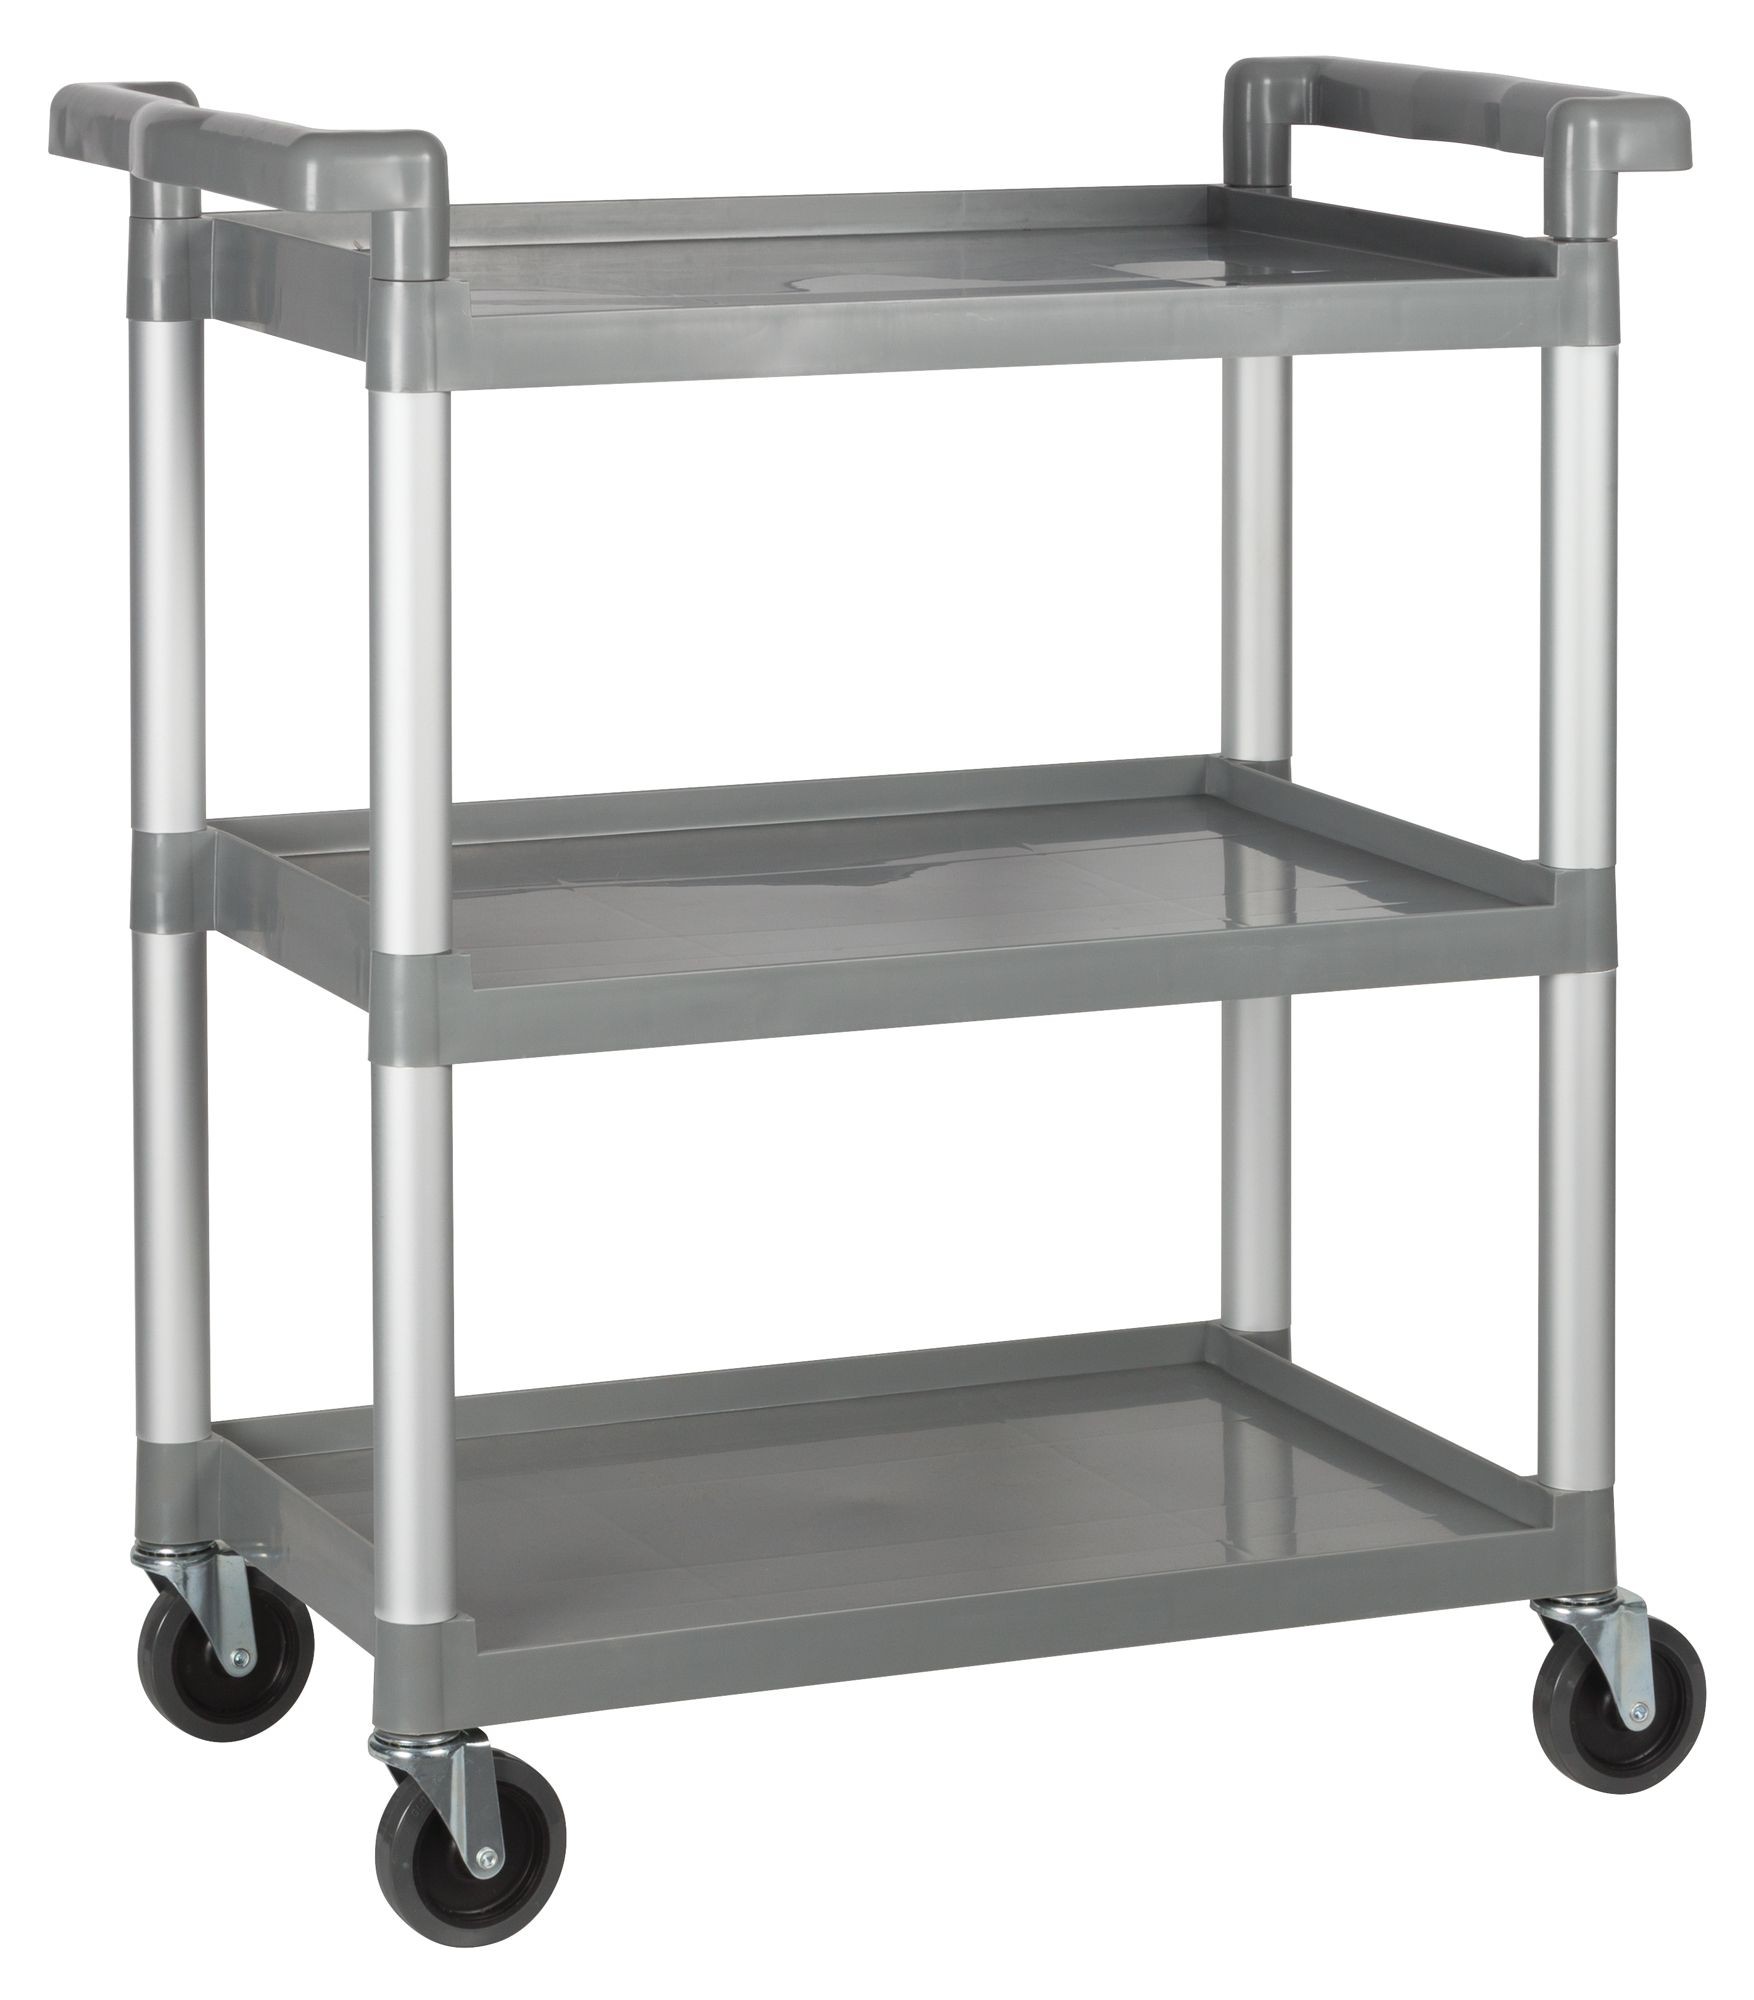 Large 3 Tier Plastic Utility Trolley 